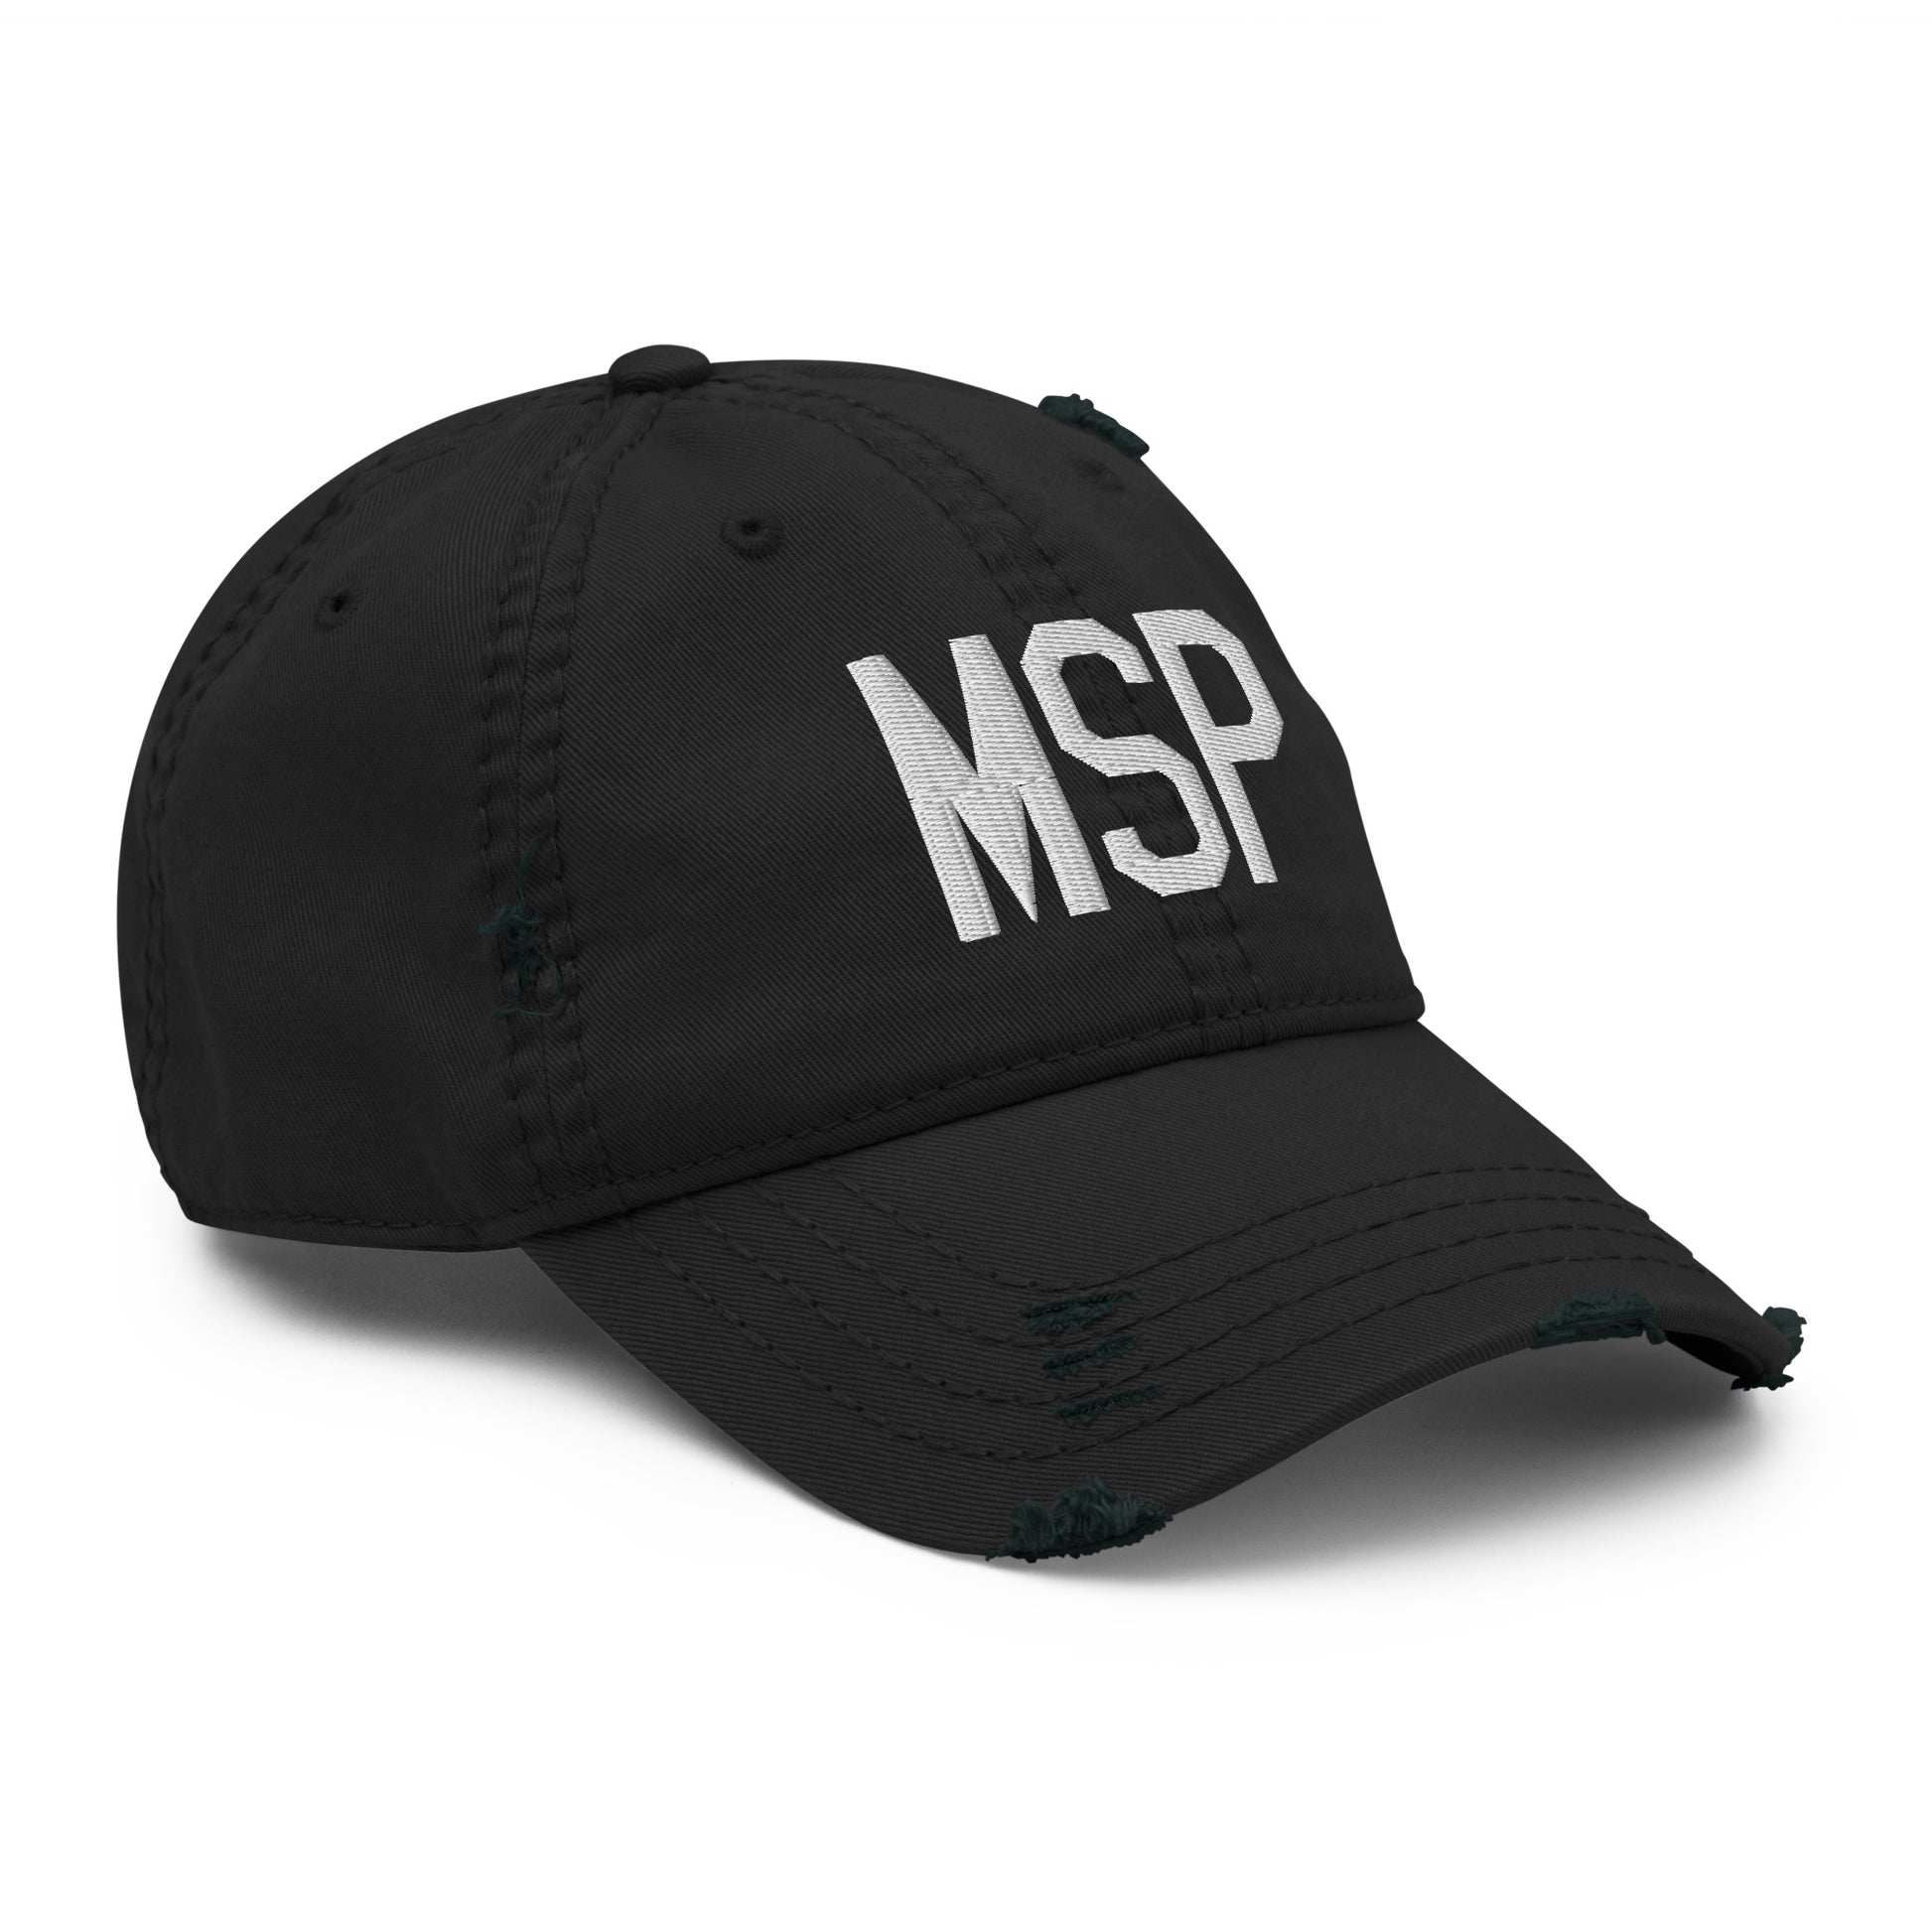 Airport Code Distressed Hat - White • MSP Minneapolis • YHM Designs - Image 12